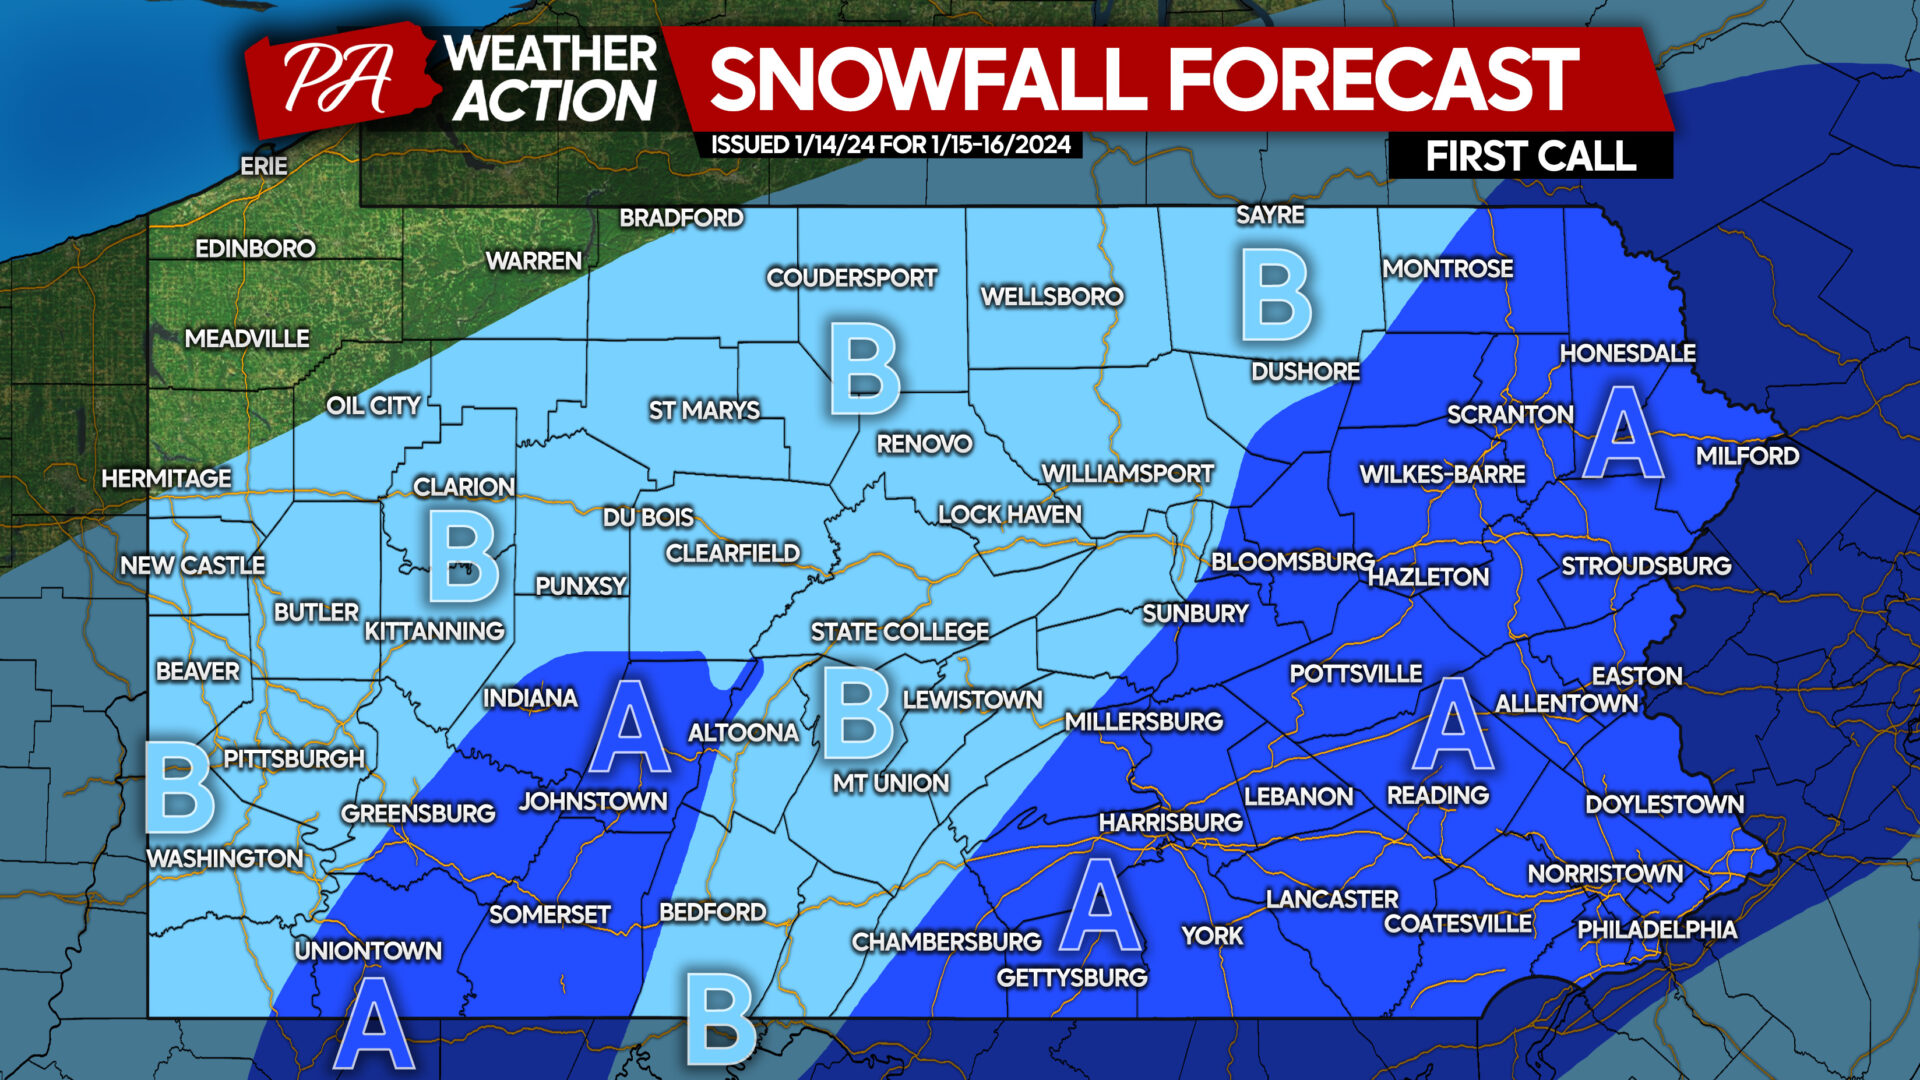 First Call Snowfall Forecast for Monday Night – Tuesday’s Light Snow (Travel Impacts Expected)